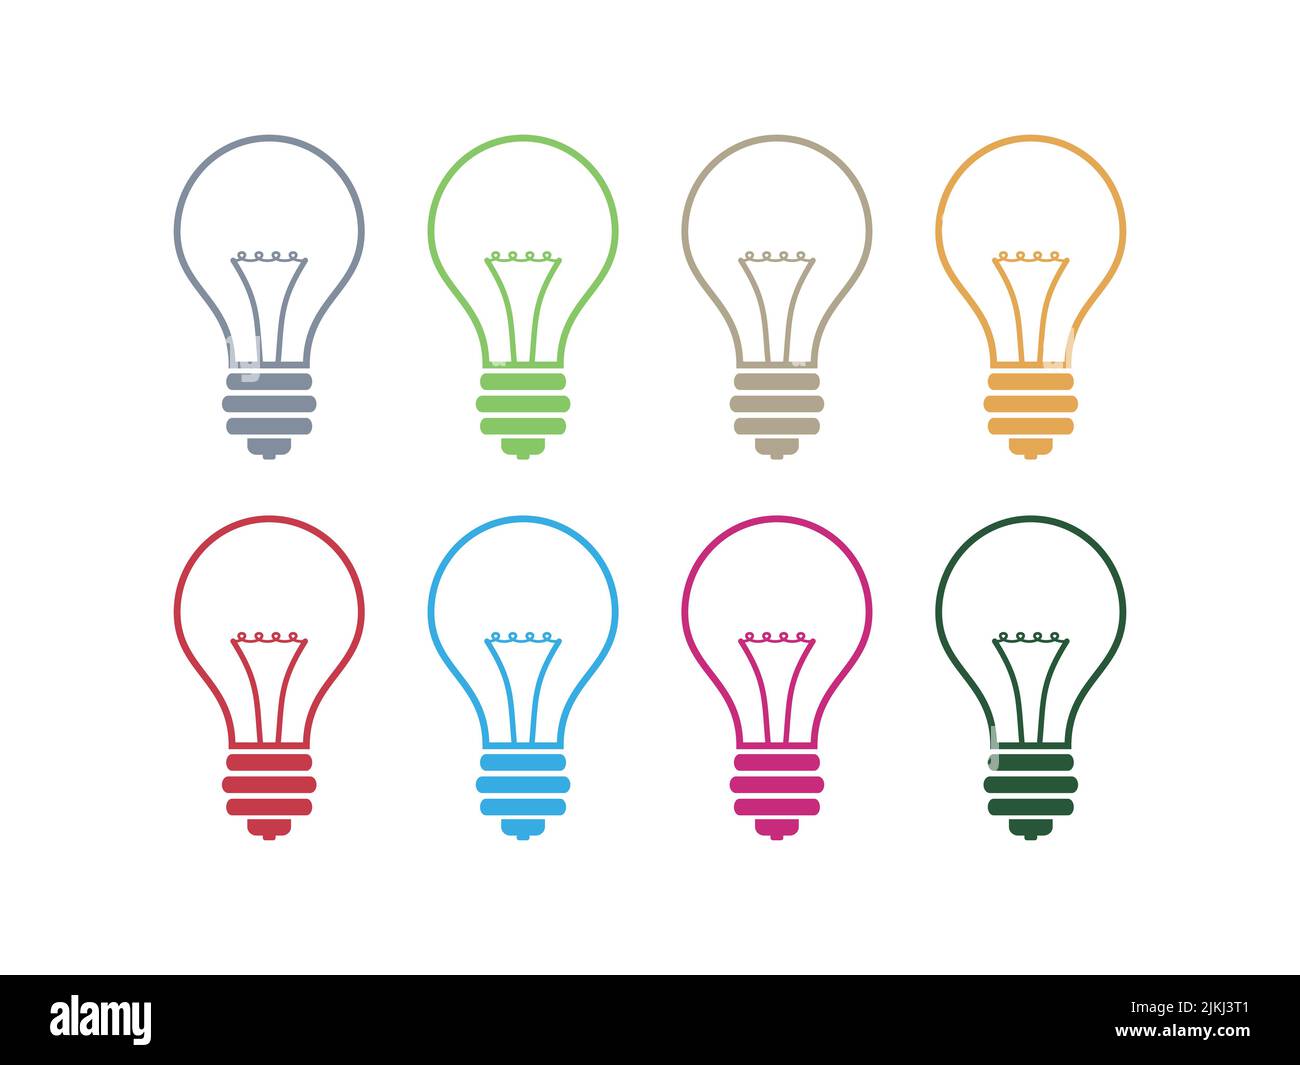 Light bulb icon or logo set isolated sign symbol vector Stock Vector